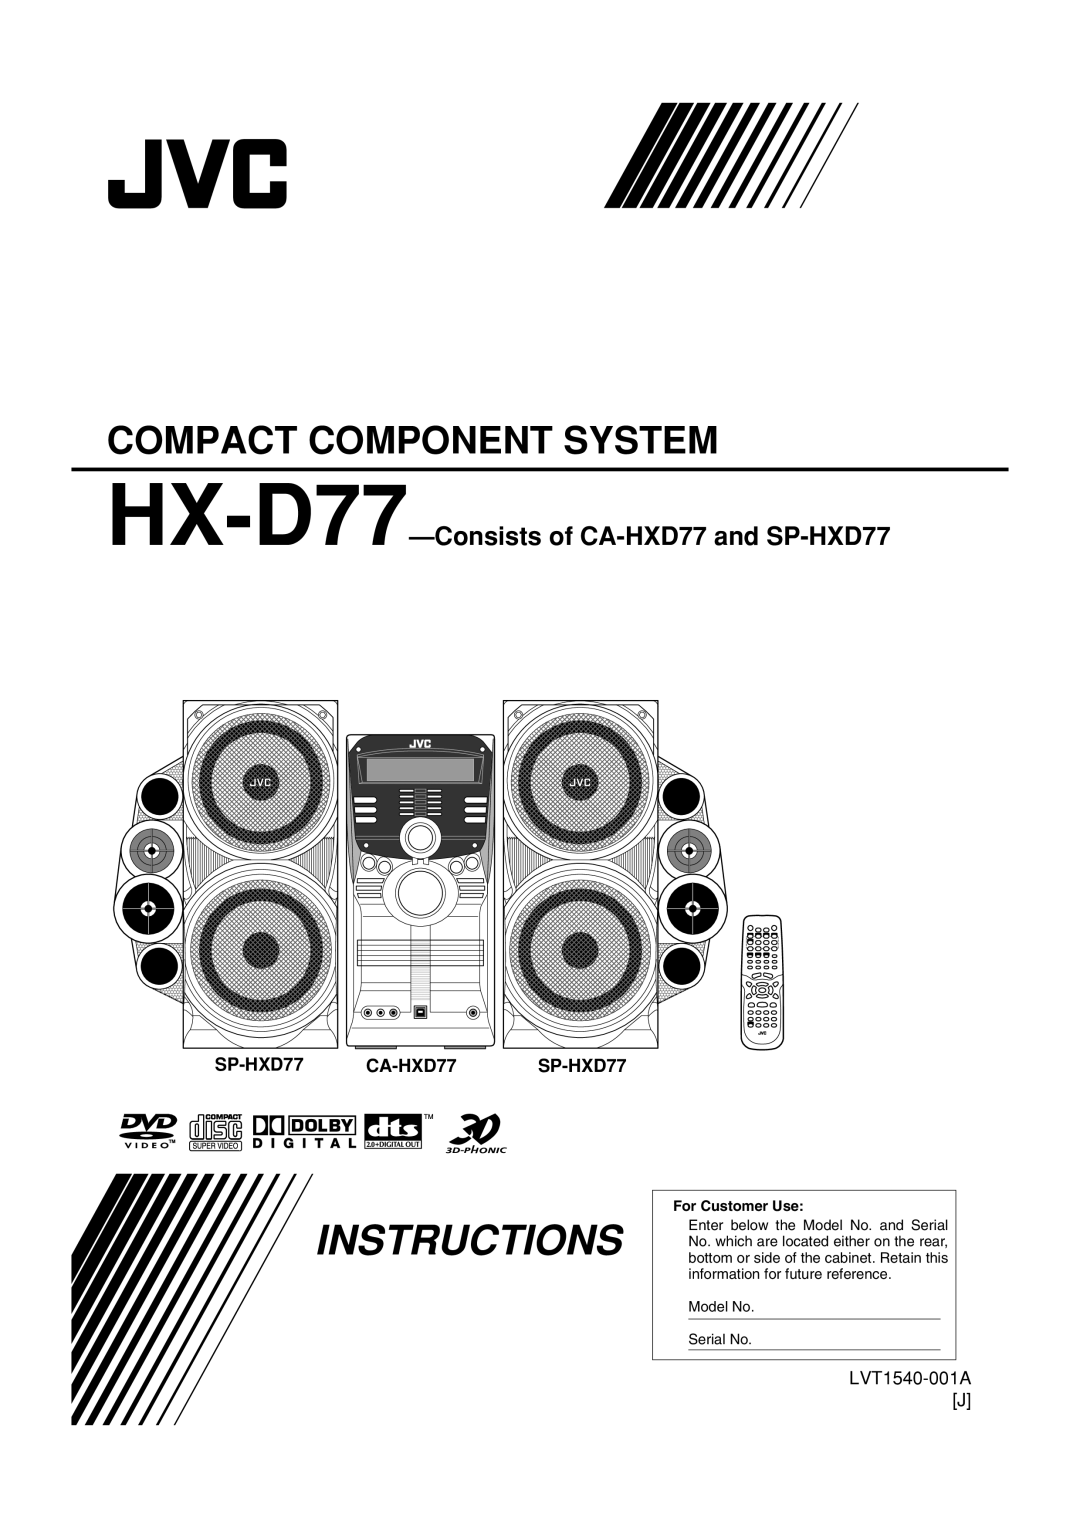 JVC manual Instructions, Compact Component System, HX-D77—Consistsof CA-HXD77and SP-HXD77, SP-HXD77 CA-HXD77 SP-HXD77 